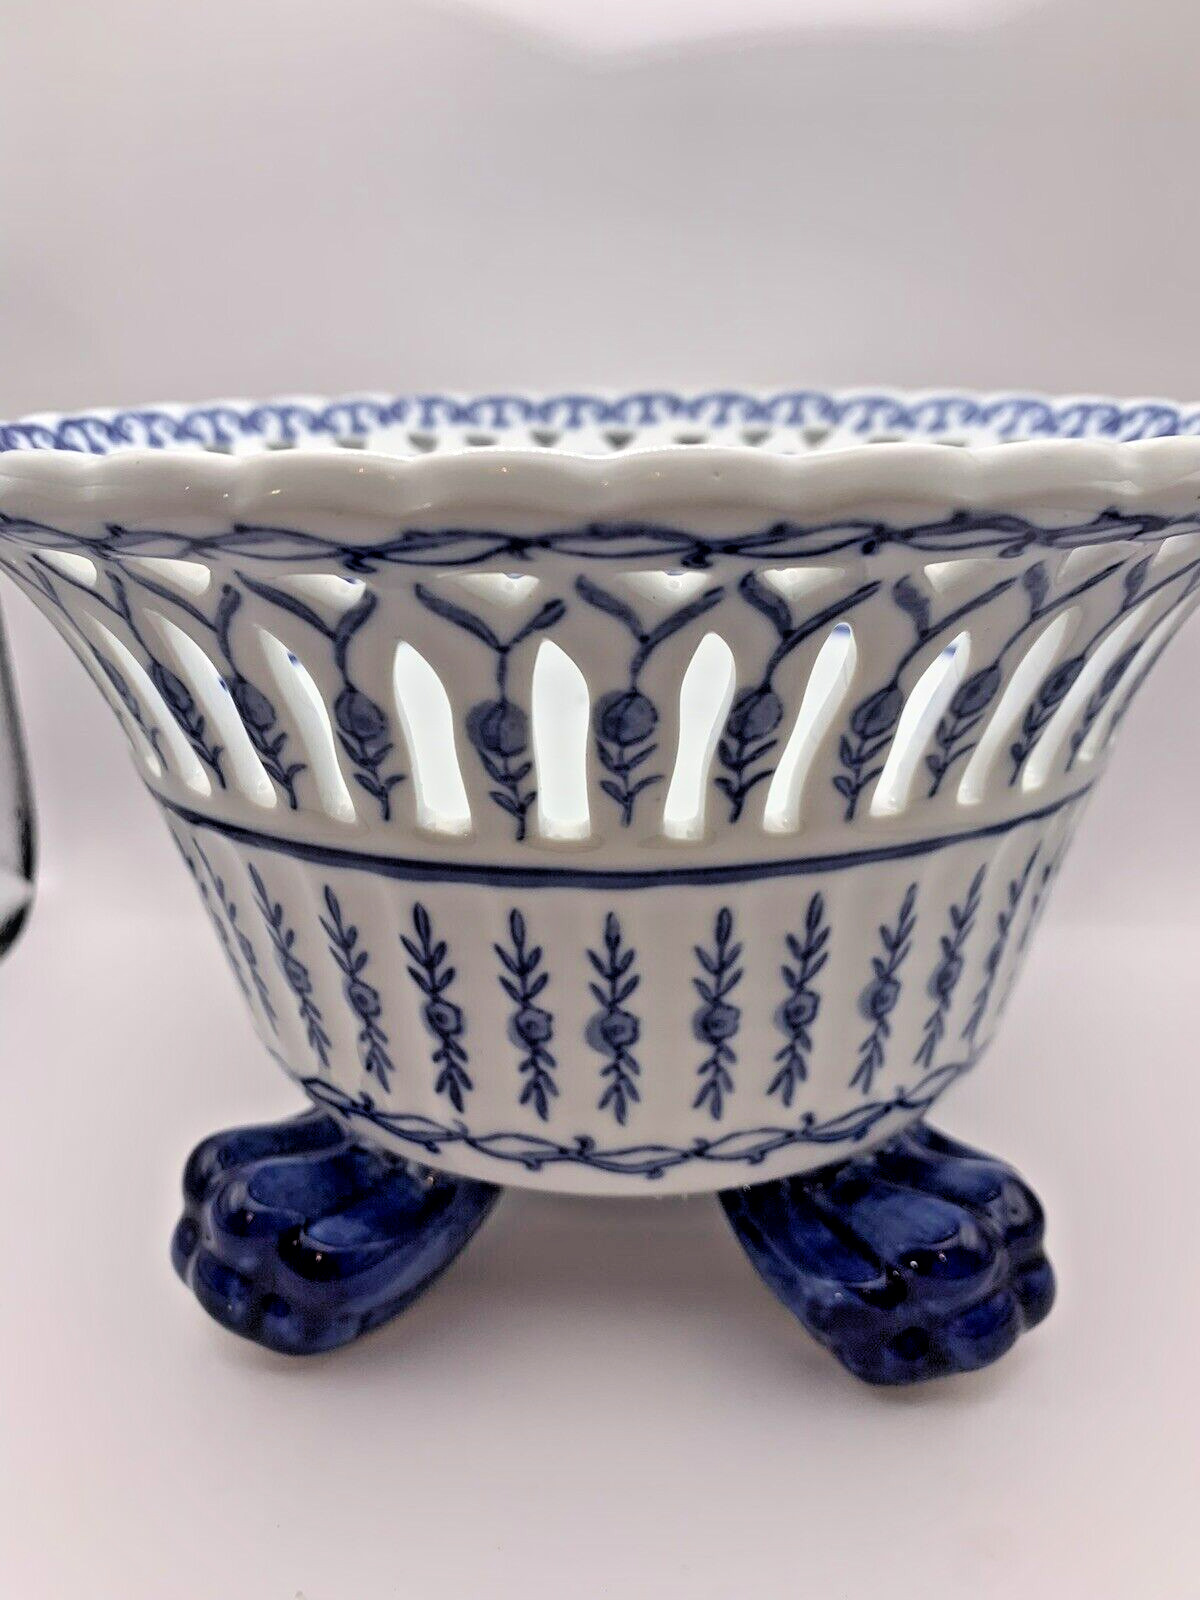 Bombay Company Reticulated Footed Blue and White Decorative Bowl